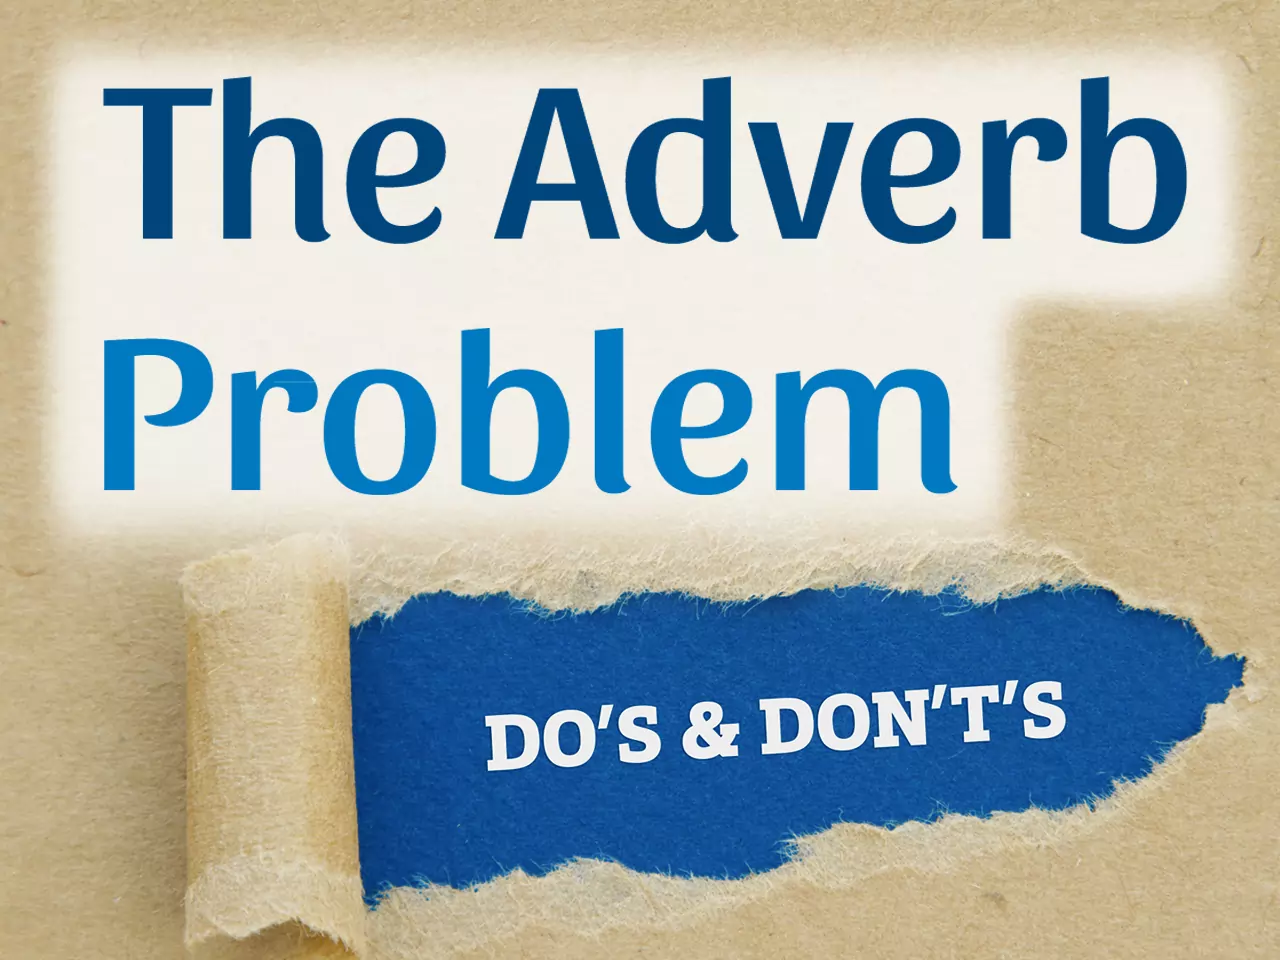 Using Adverbs in Novels and Why Authors Should Care